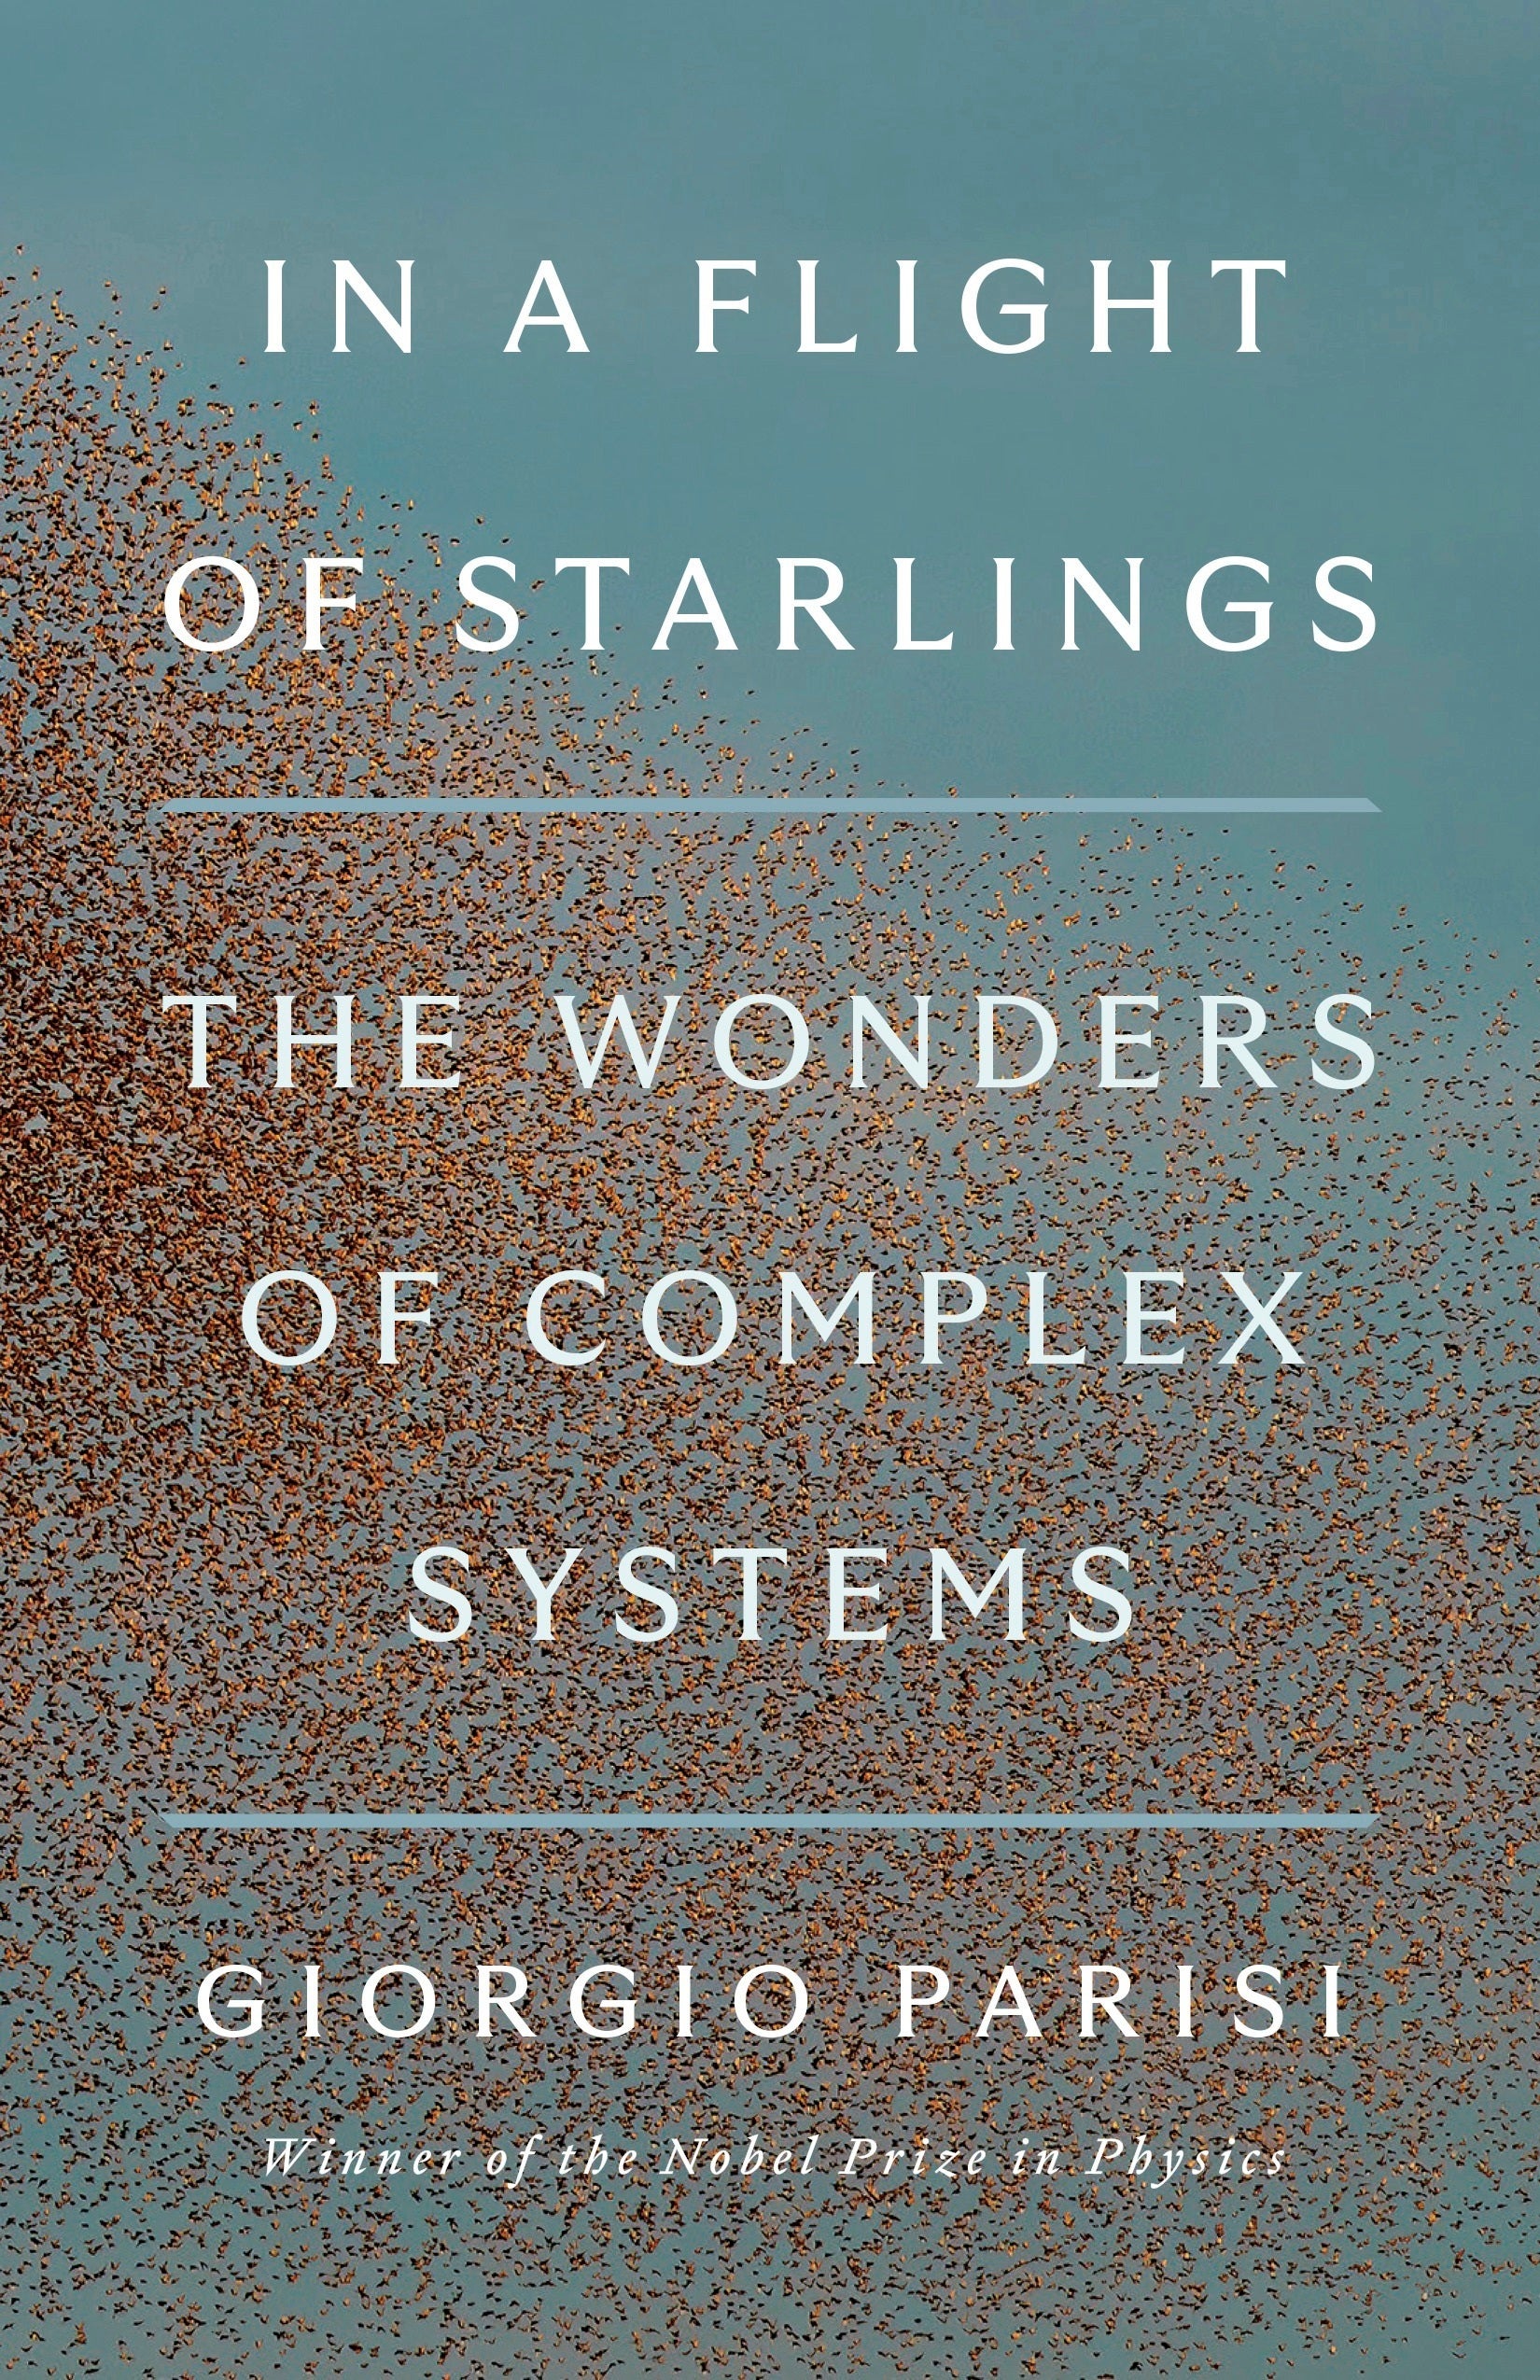 Book Review - In a Flight of Starlings